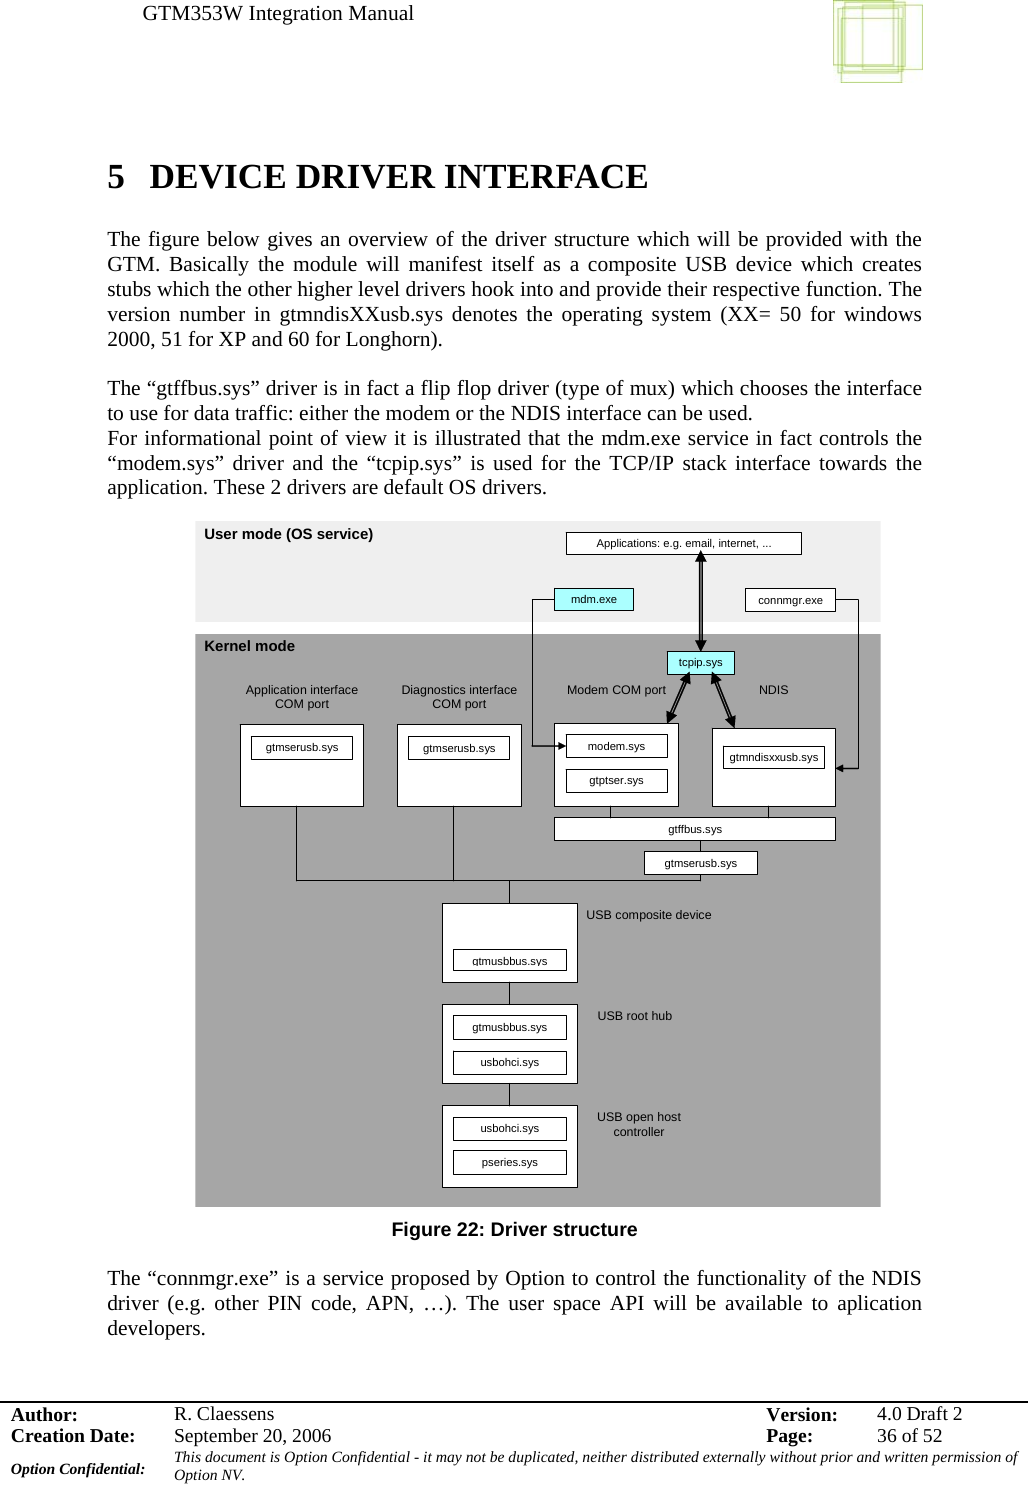 GTM353W Integration Manual      Author: R. Claessens  Version:  4.0 Draft 2Creation Date:  September 20, 2006  Page:  36 of 52 Option Confidential:  This document is Option Confidential - it may not be duplicated, neither distributed externally without prior and written permission of Option NV.    5 DEVICE DRIVER INTERFACE  The figure below gives an overview of the driver structure which will be provided with the GTM. Basically the module will manifest itself as a composite USB device which creates stubs which the other higher level drivers hook into and provide their respective function. The version number in gtmndisXXusb.sys denotes the operating system (XX= 50 for windows 2000, 51 for XP and 60 for Longhorn).  The “gtffbus.sys” driver is in fact a flip flop driver (type of mux) which chooses the interface to use for data traffic: either the modem or the NDIS interface can be used.  For informational point of view it is illustrated that the mdm.exe service in fact controls the “modem.sys” driver and the “tcpip.sys” is used for the TCP/IP stack interface towards the application. These 2 drivers are default OS drivers.                               Figure 22: Driver structure  The “connmgr.exe” is a service proposed by Option to control the functionality of the NDIS driver (e.g. other PIN code, APN, …). The user space API will be available to aplication developers.   gtmserusb.sys Application interface COM port gtmserusb.sys Diagnostics interface COM port gtptser.sys Modem COM port modem.sys gtmndisxxusb.sys gtffbus.sysconnmgr.exe Kernel modeUser mode (OS service) gtmusbbus.sysUSB composite devicegtmusbbus.sys usbohci.sys USB root hubusbohci.sys pseries.sys USB open host controller NDIS mdm.exetcpip.sys Applications: e.g. email, internet, ... gtmserusb.sys 